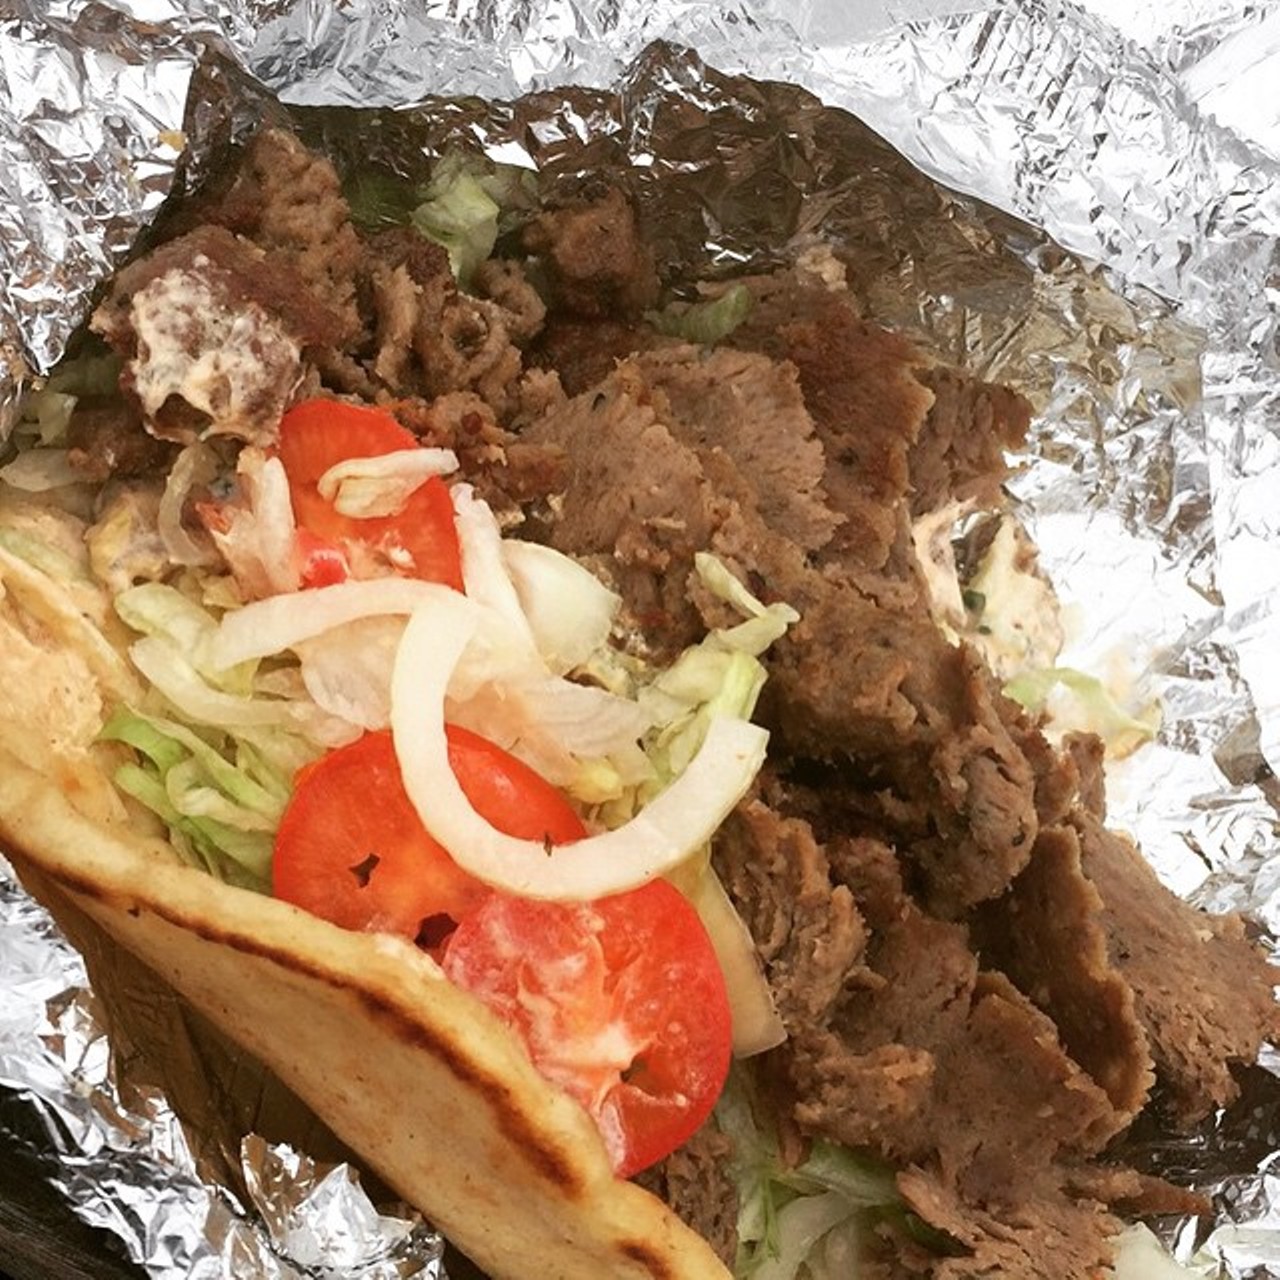 Grab a small gyro (it's still huge) for only $8 at Steve's Gyros. Find his stall at the 
West Side Market.